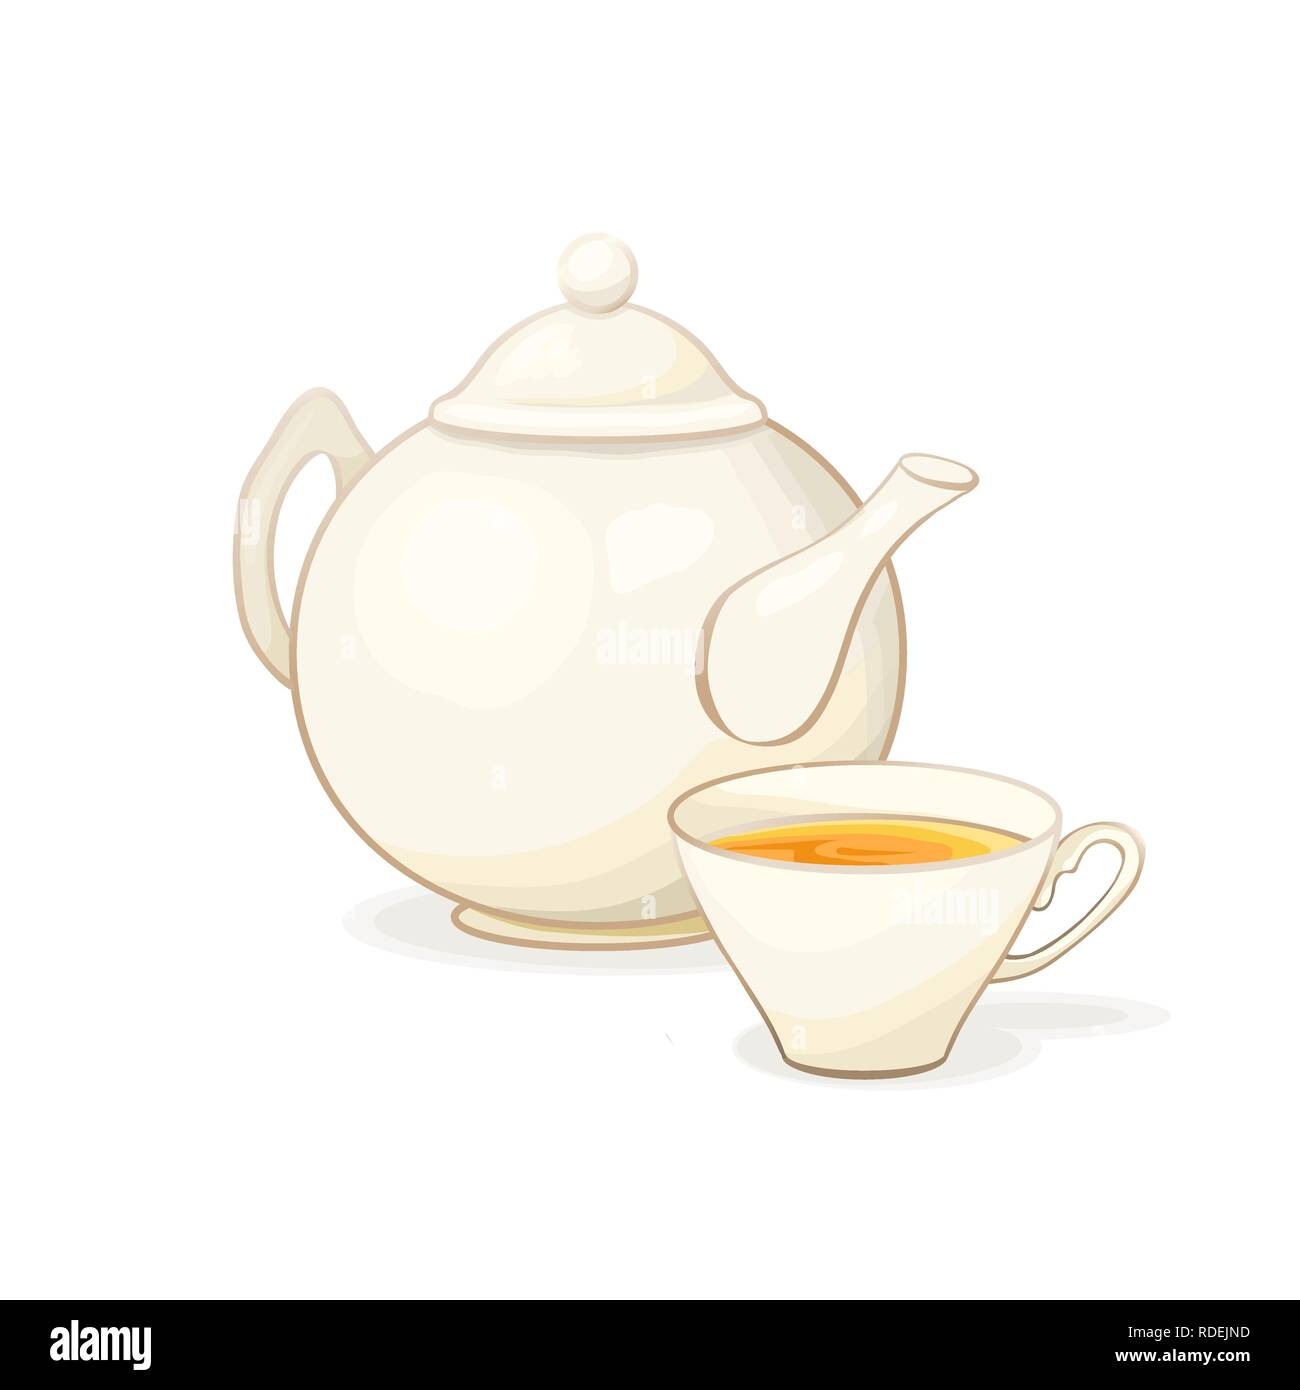 Porcelain or Ceramic Teapot Service. Black or Green Tea in Tea Cup. Isolated and Detailed Kitchen Dishes Vector Illustration. Kitchenware or Utensil Banner Design, Restaurant Menu, English Breakfast. Stock Vector